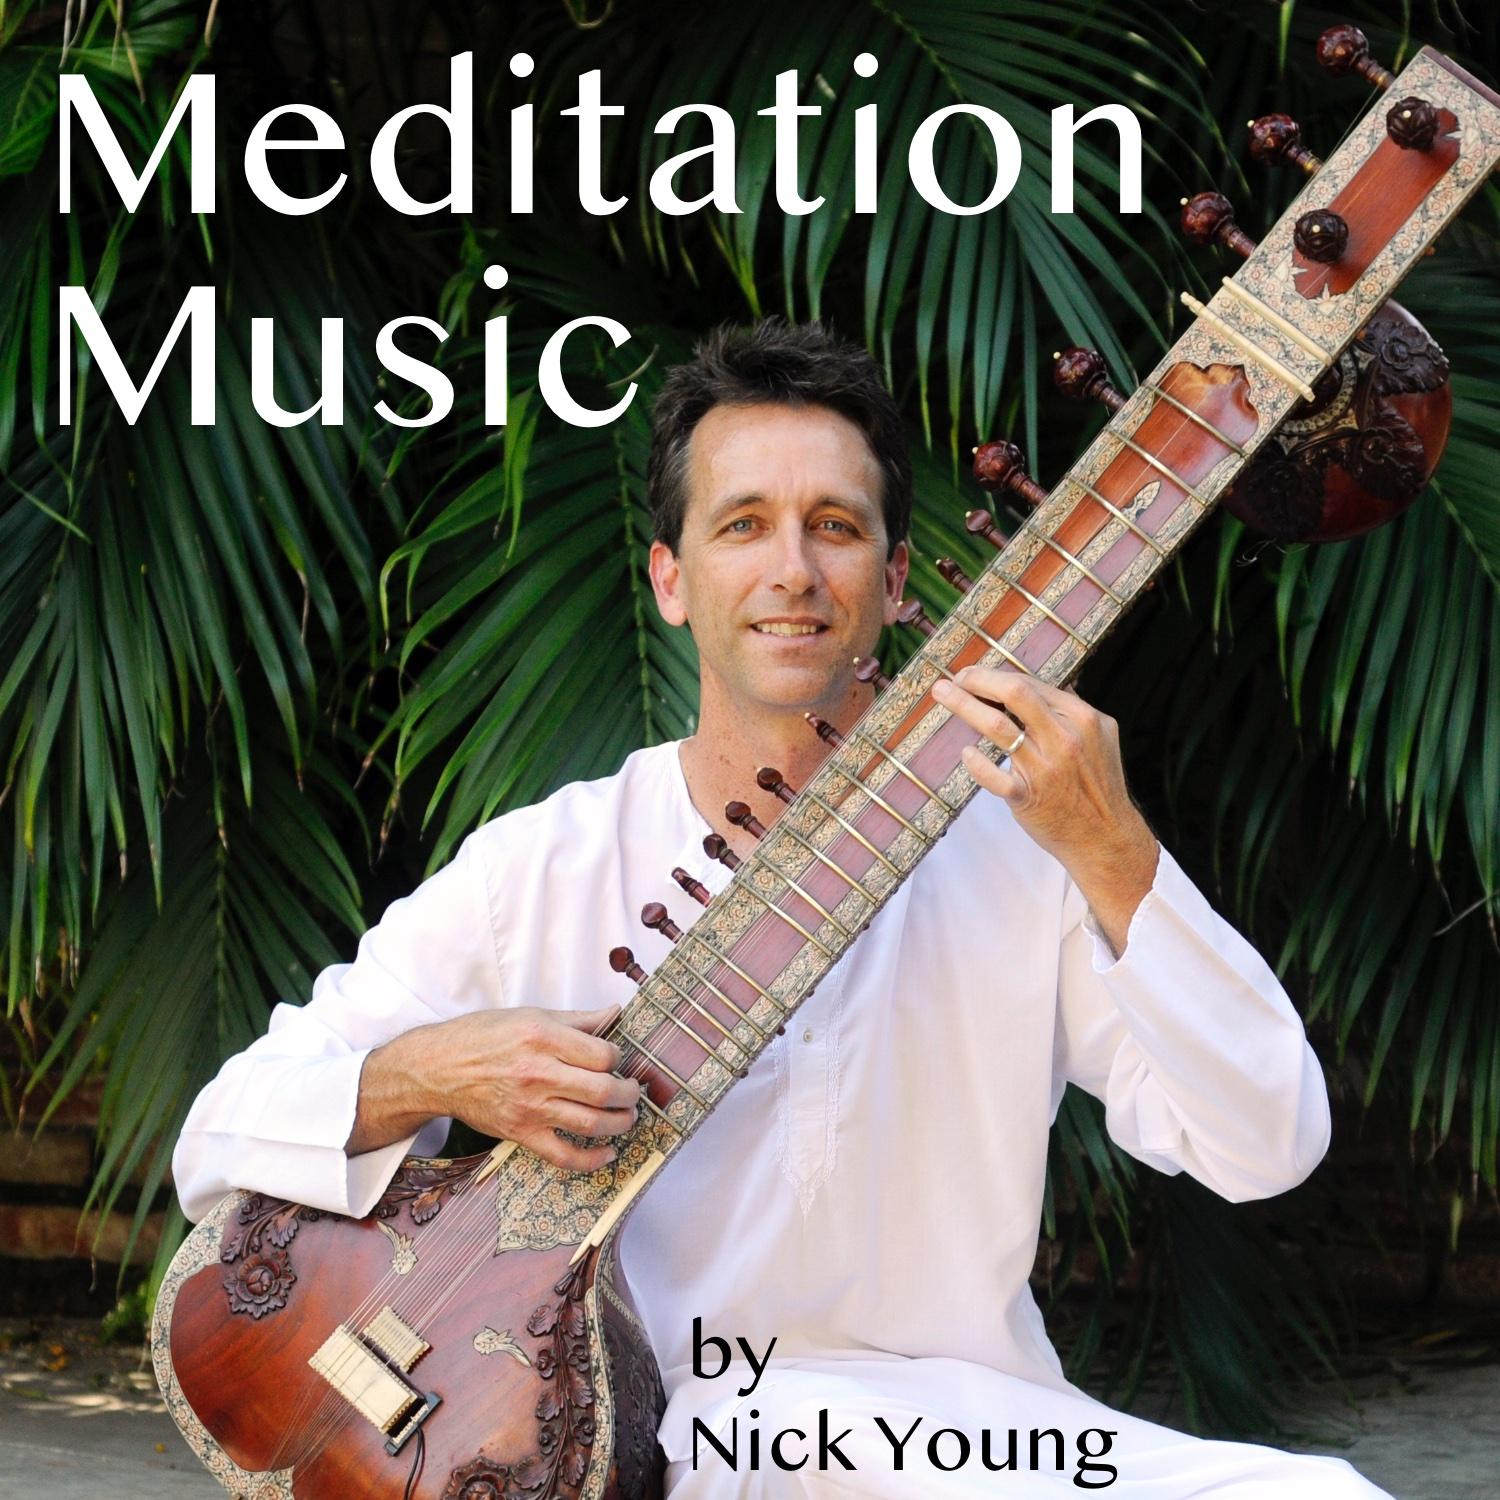 Meditation Music 21 - Crestline, CA - Sitar, Guitar & Bamboo Flute - Music For Meditation, Sleep, Relaxation, Massage, Yoga, Studying and Therapy